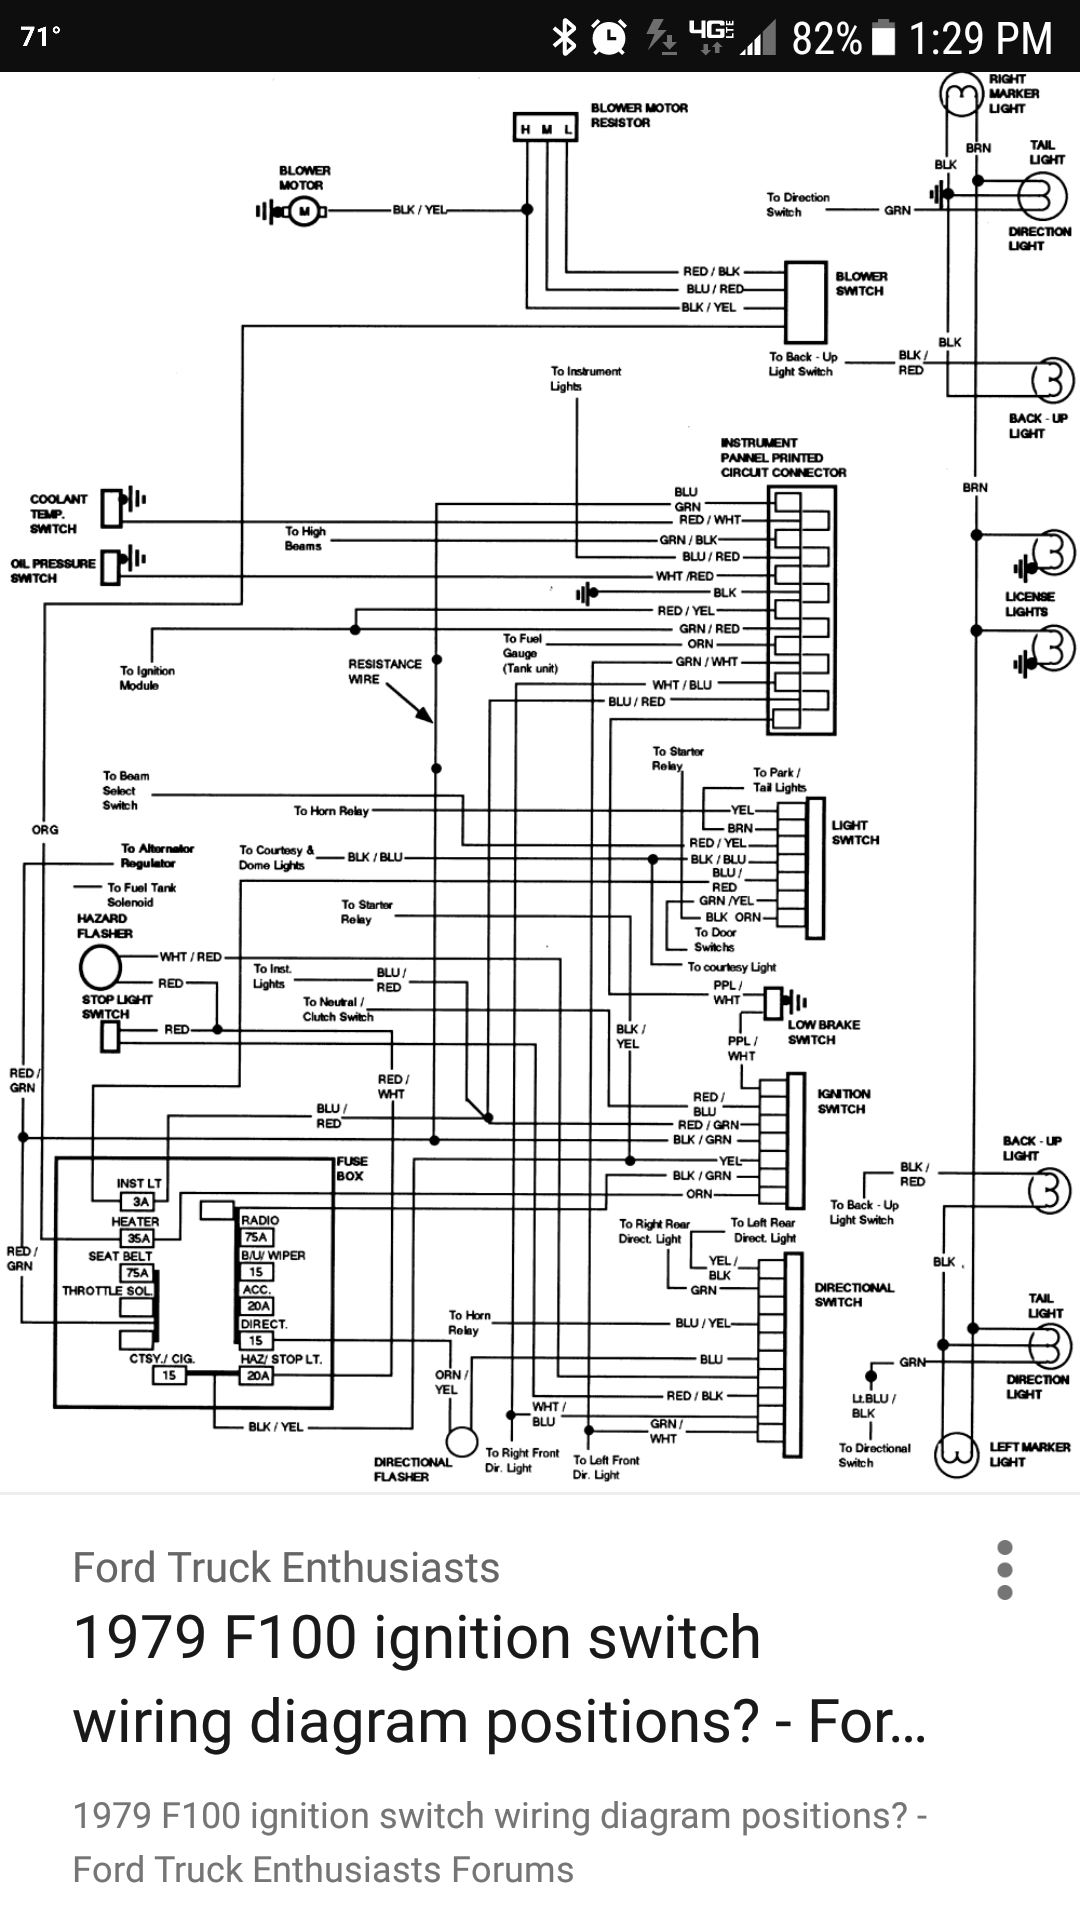 How to Read Wiring Diagram - Ford F150 Forum - Community  